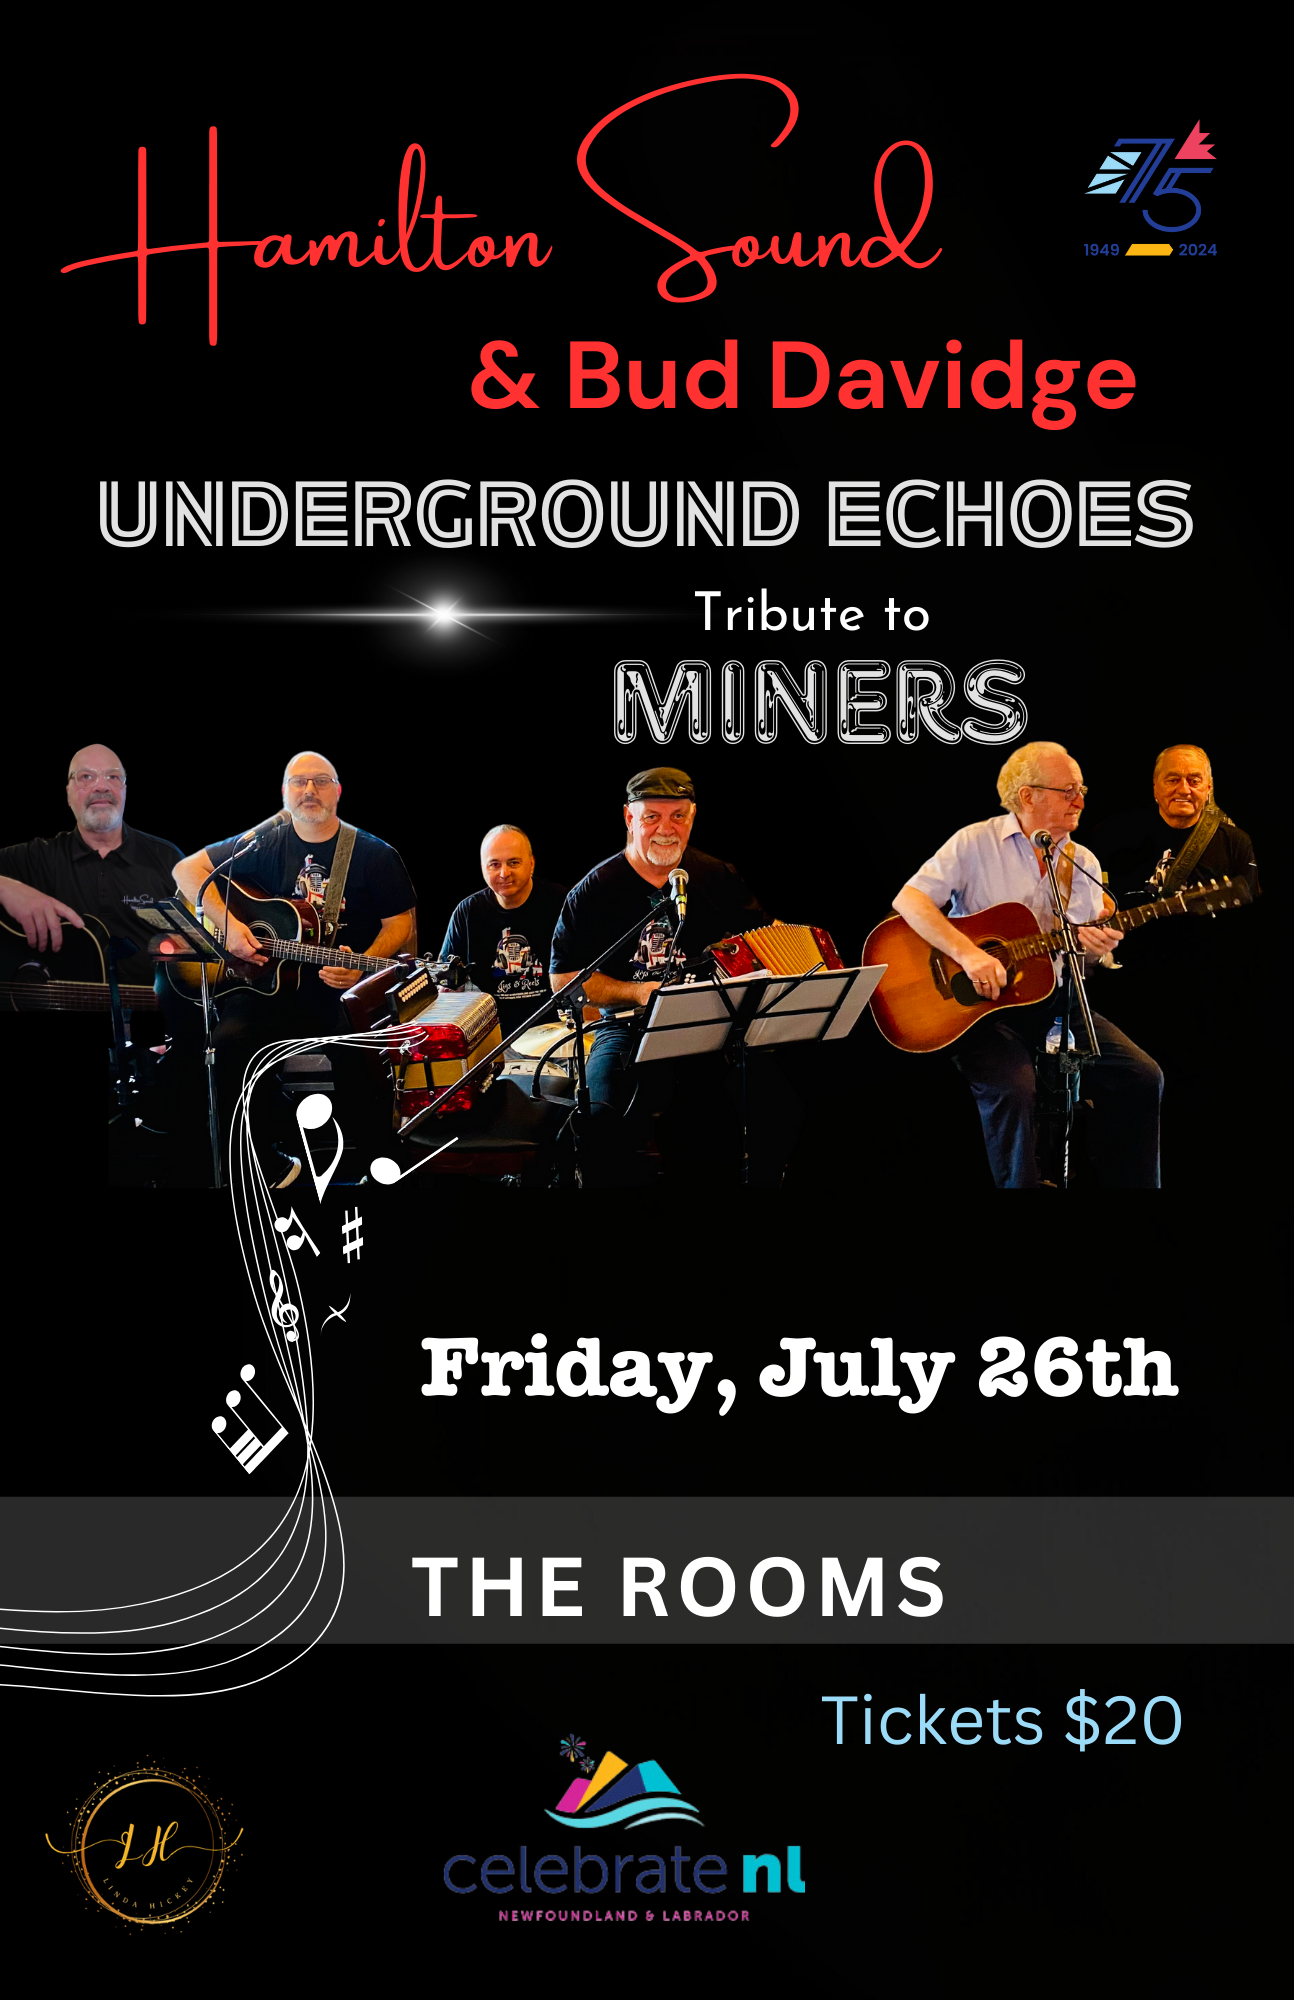 Hamilton Sound Underground Echoes – A Tribute to Miners